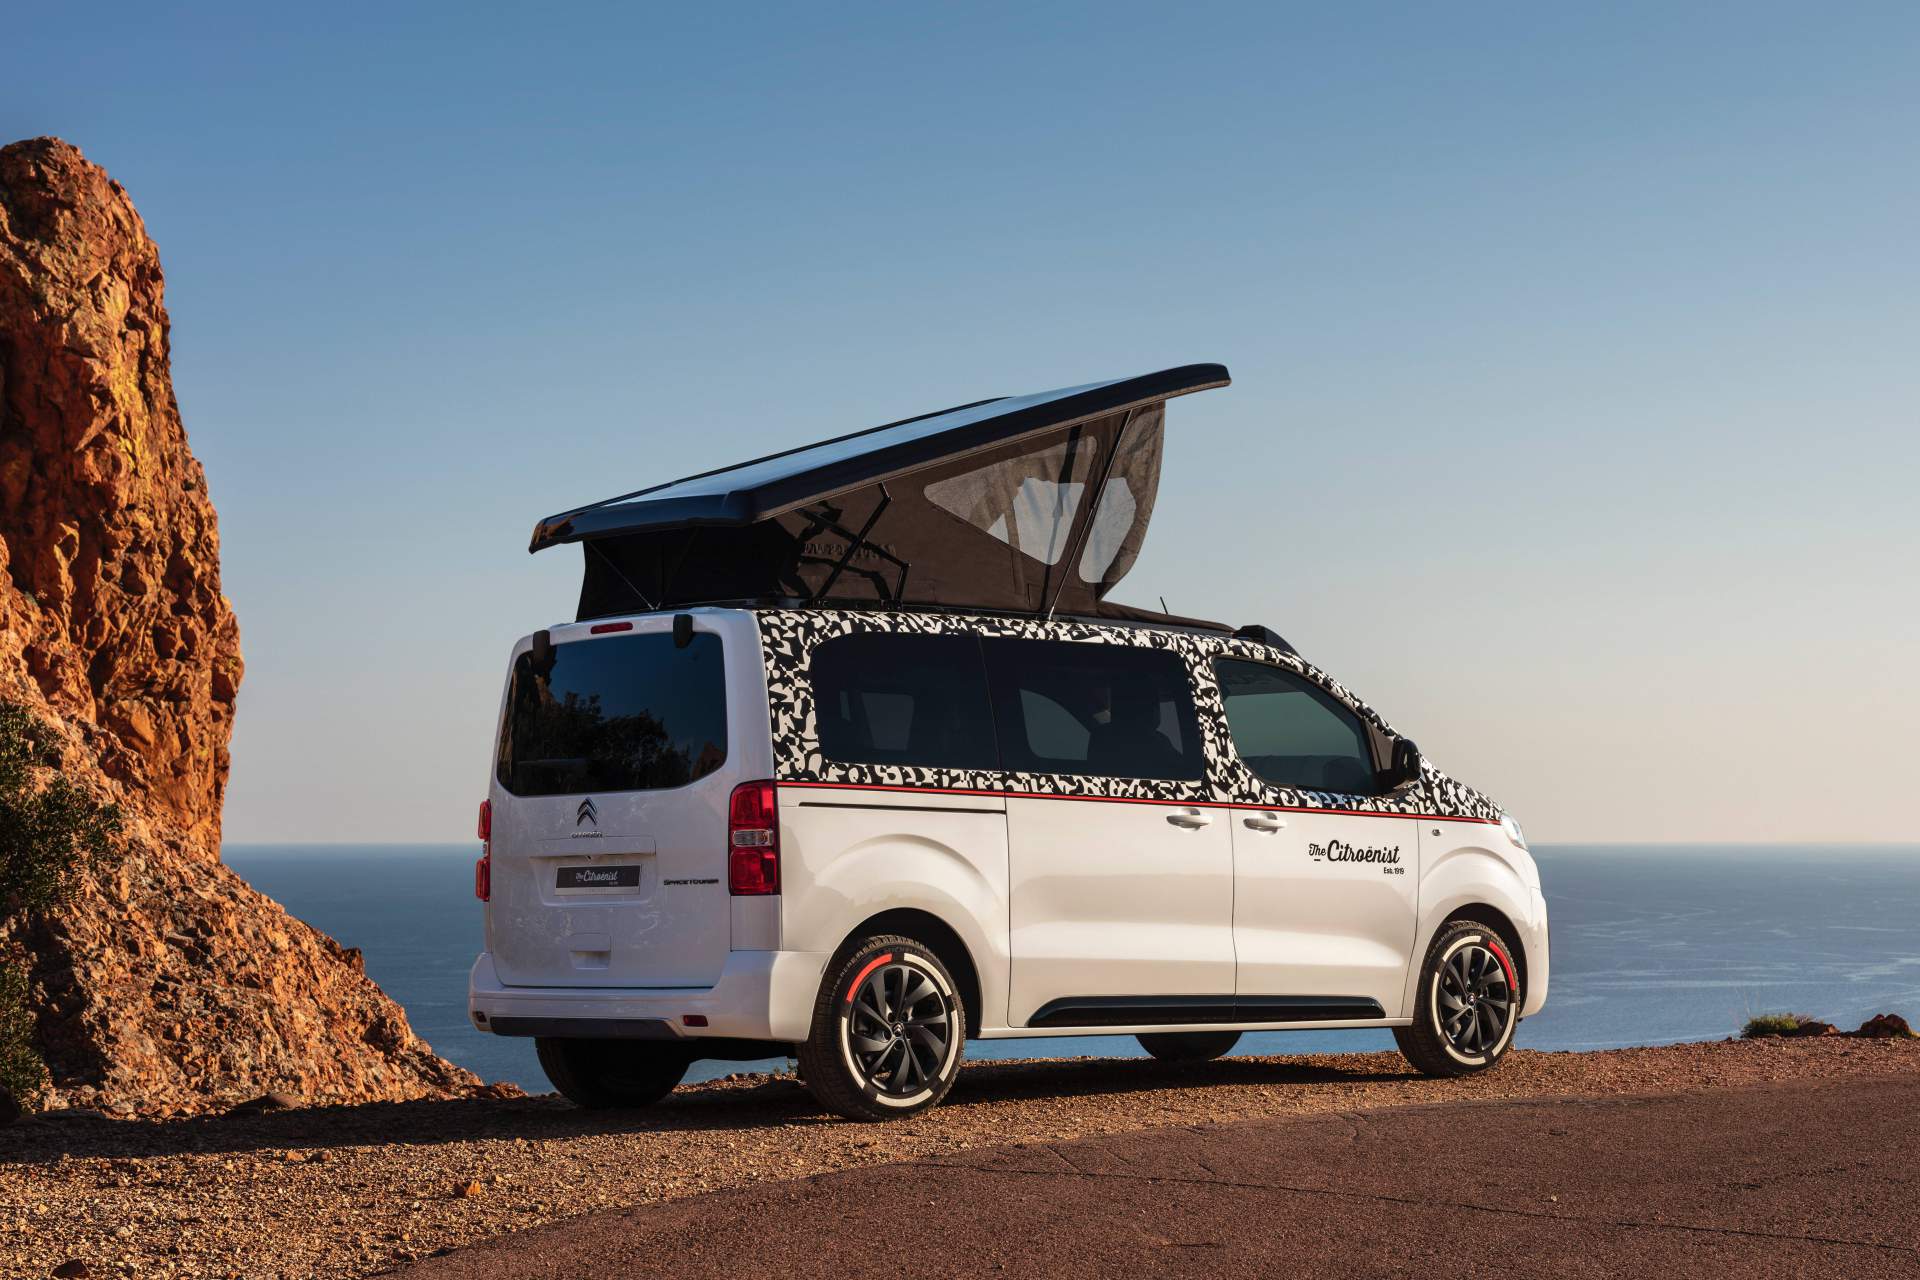 Citroen Built This Spacetourer Awd Camper Just To Show Off